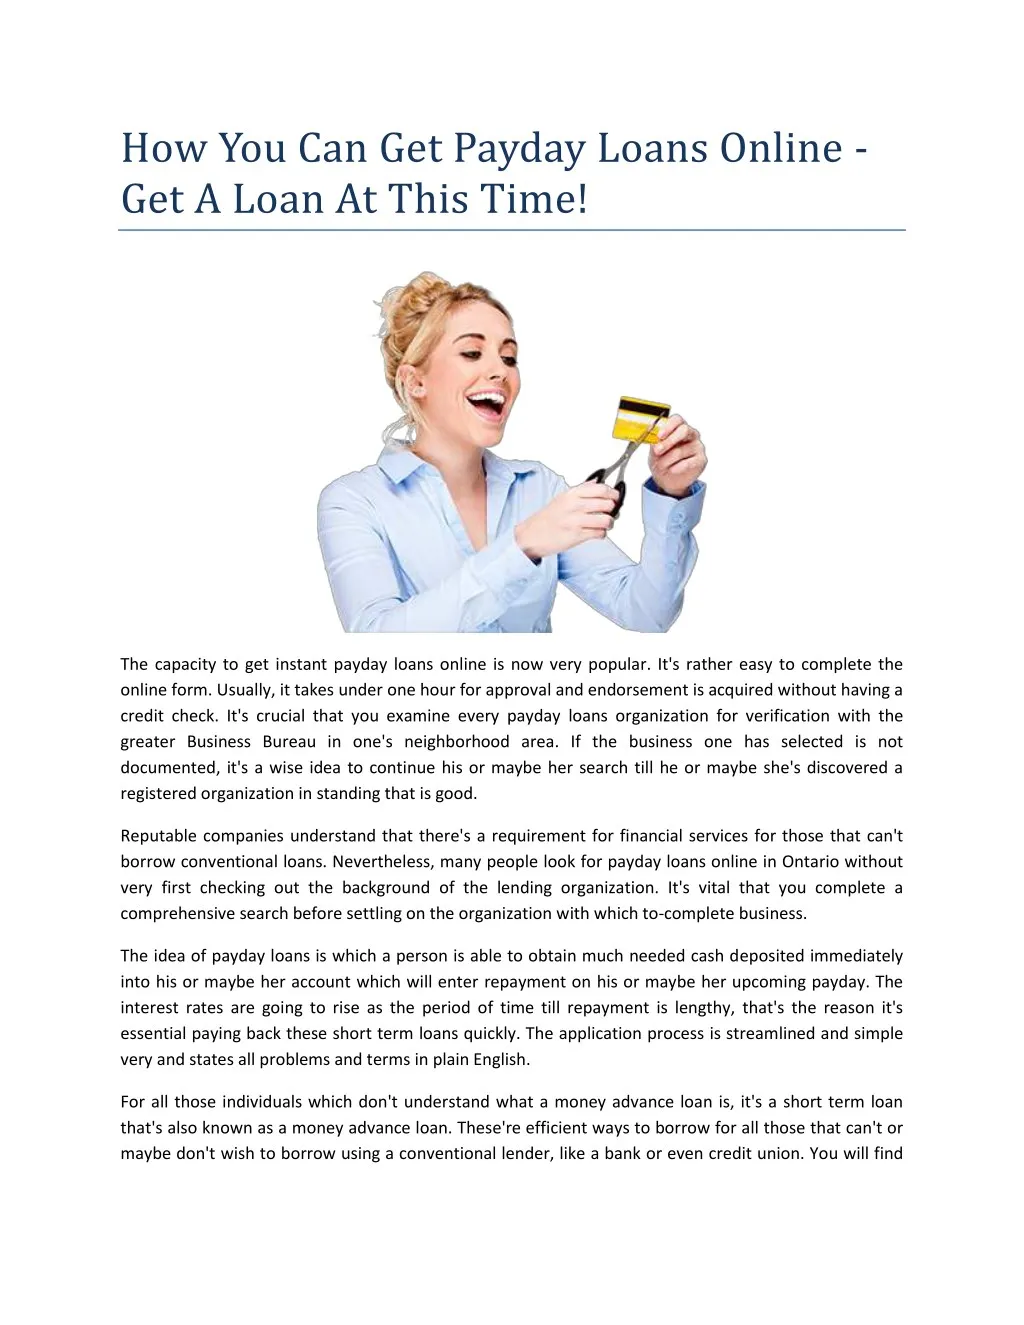 how you can get payday loans online get a loan